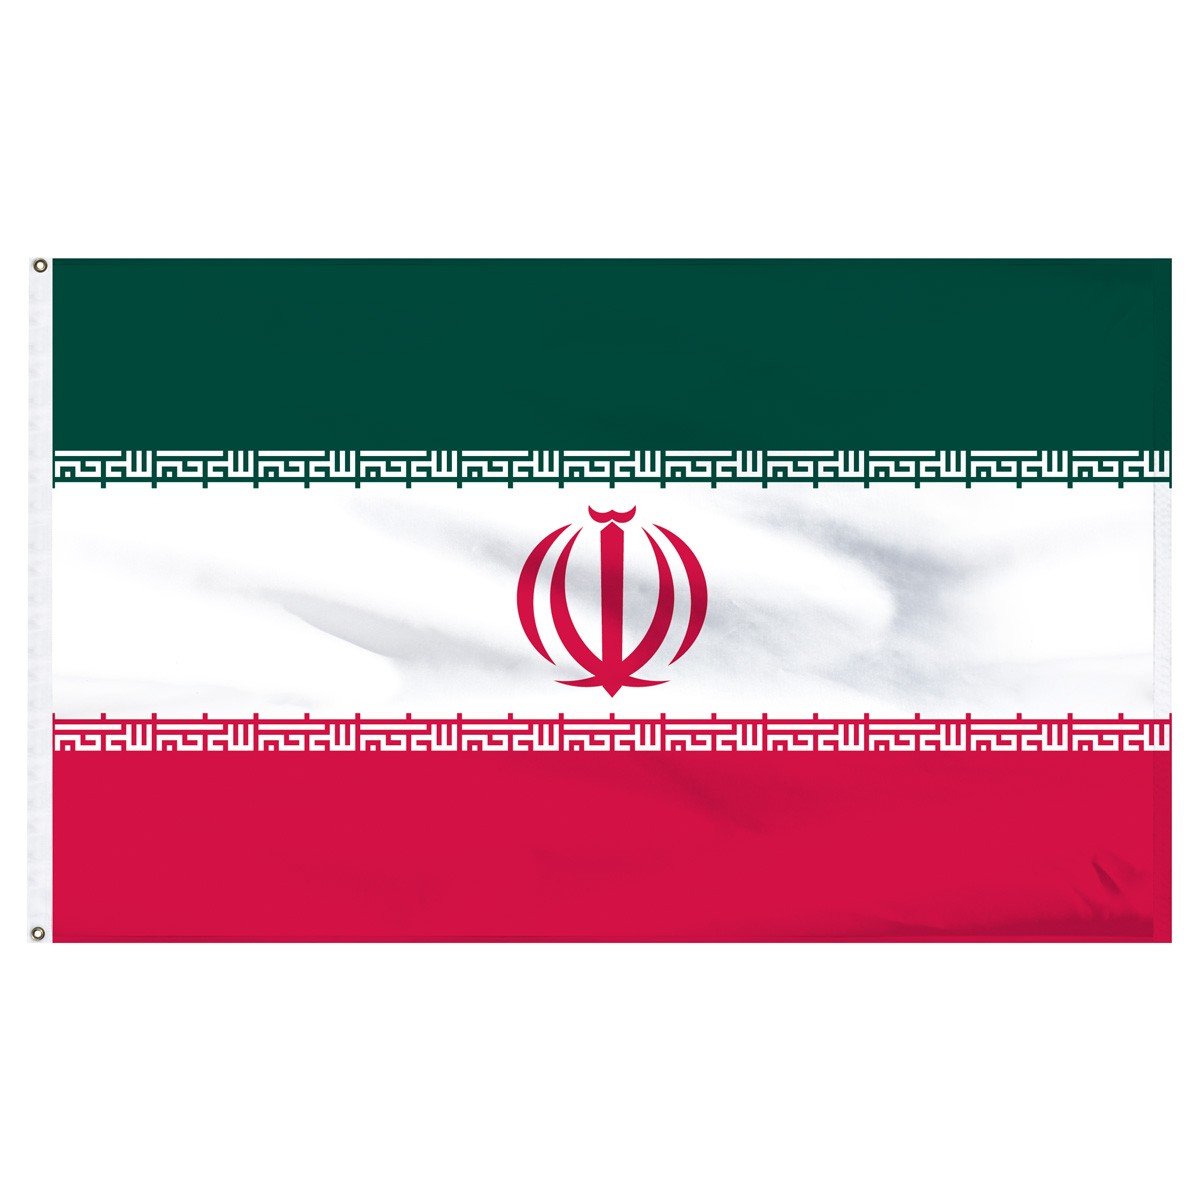 Iran Building Pennants and Flags